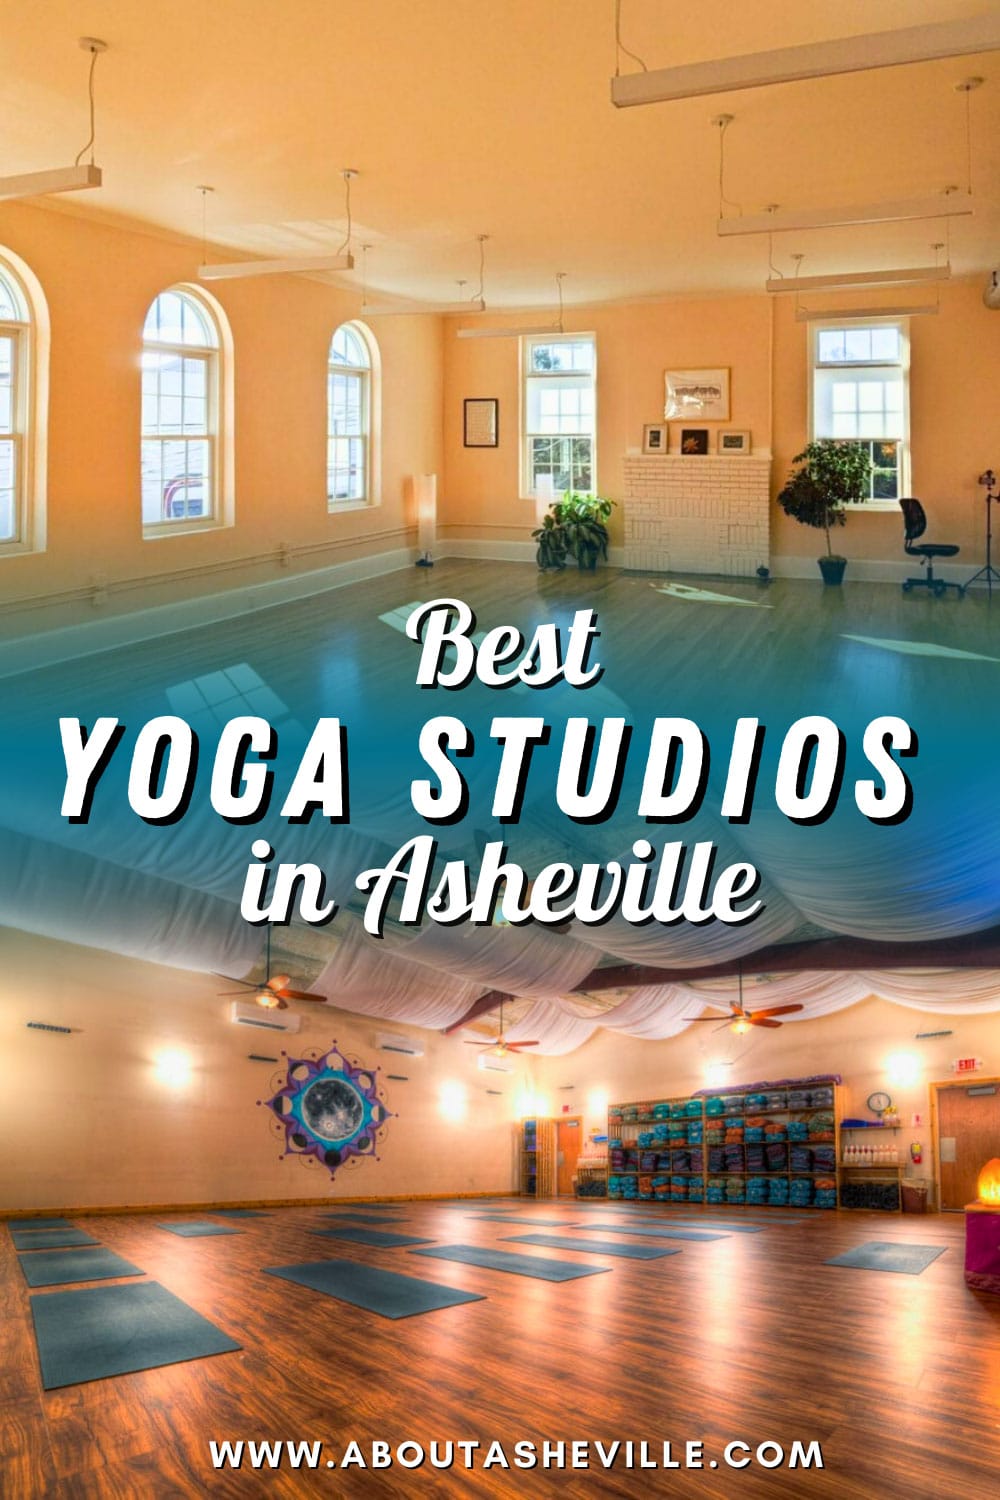 Yoga In Asheville: The Best Yoga Studios, Classes, And Events